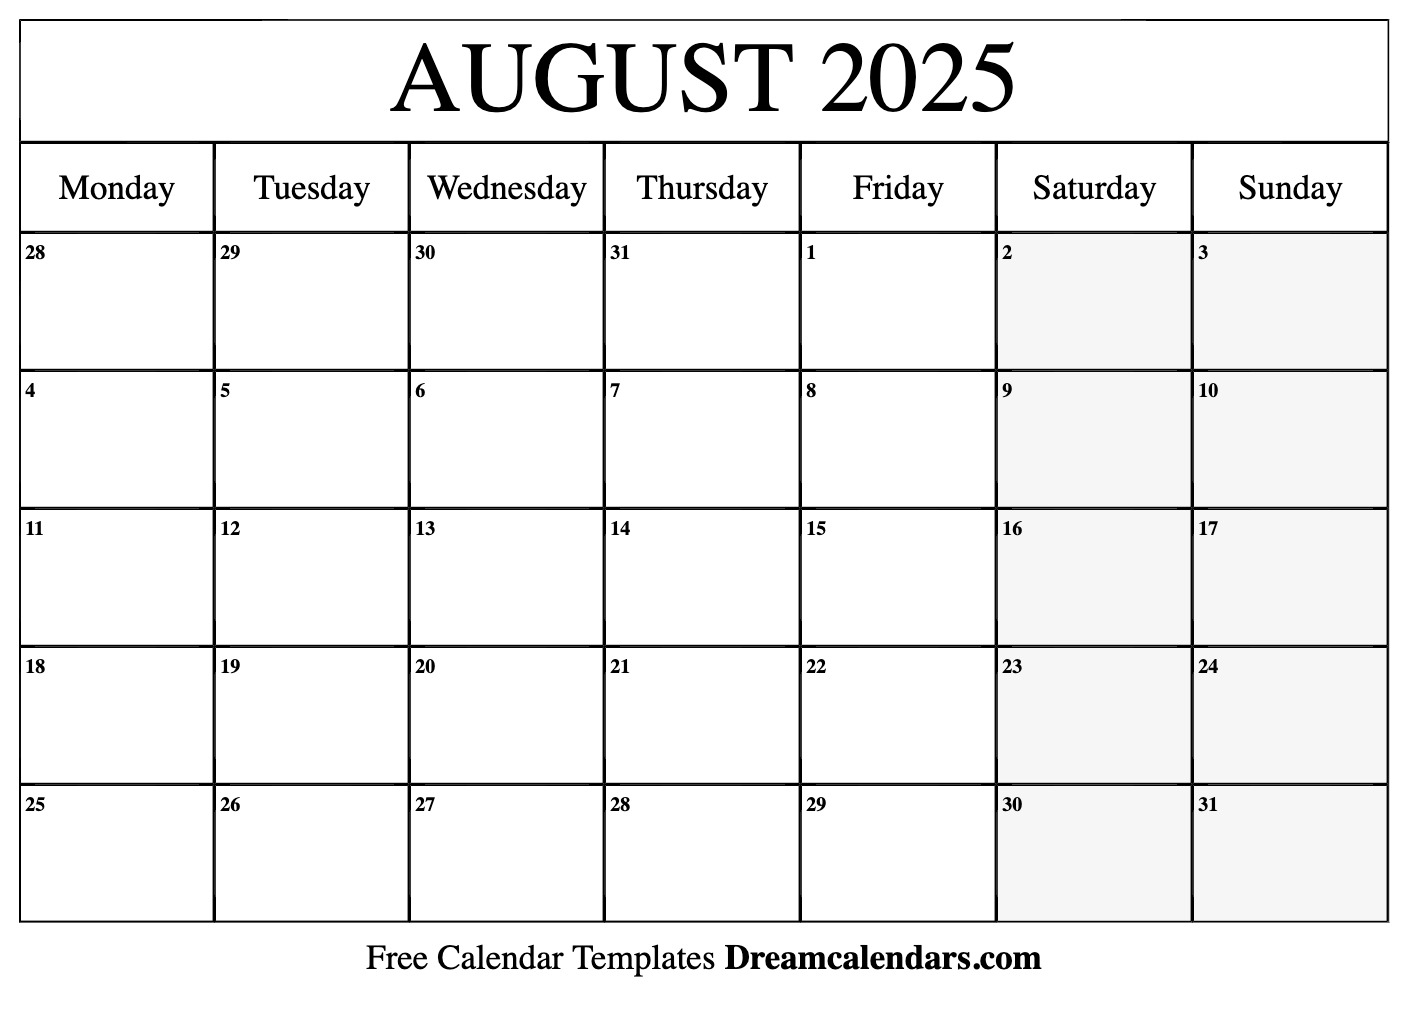 august-2025-calendar-free-blank-printable-with-holidays